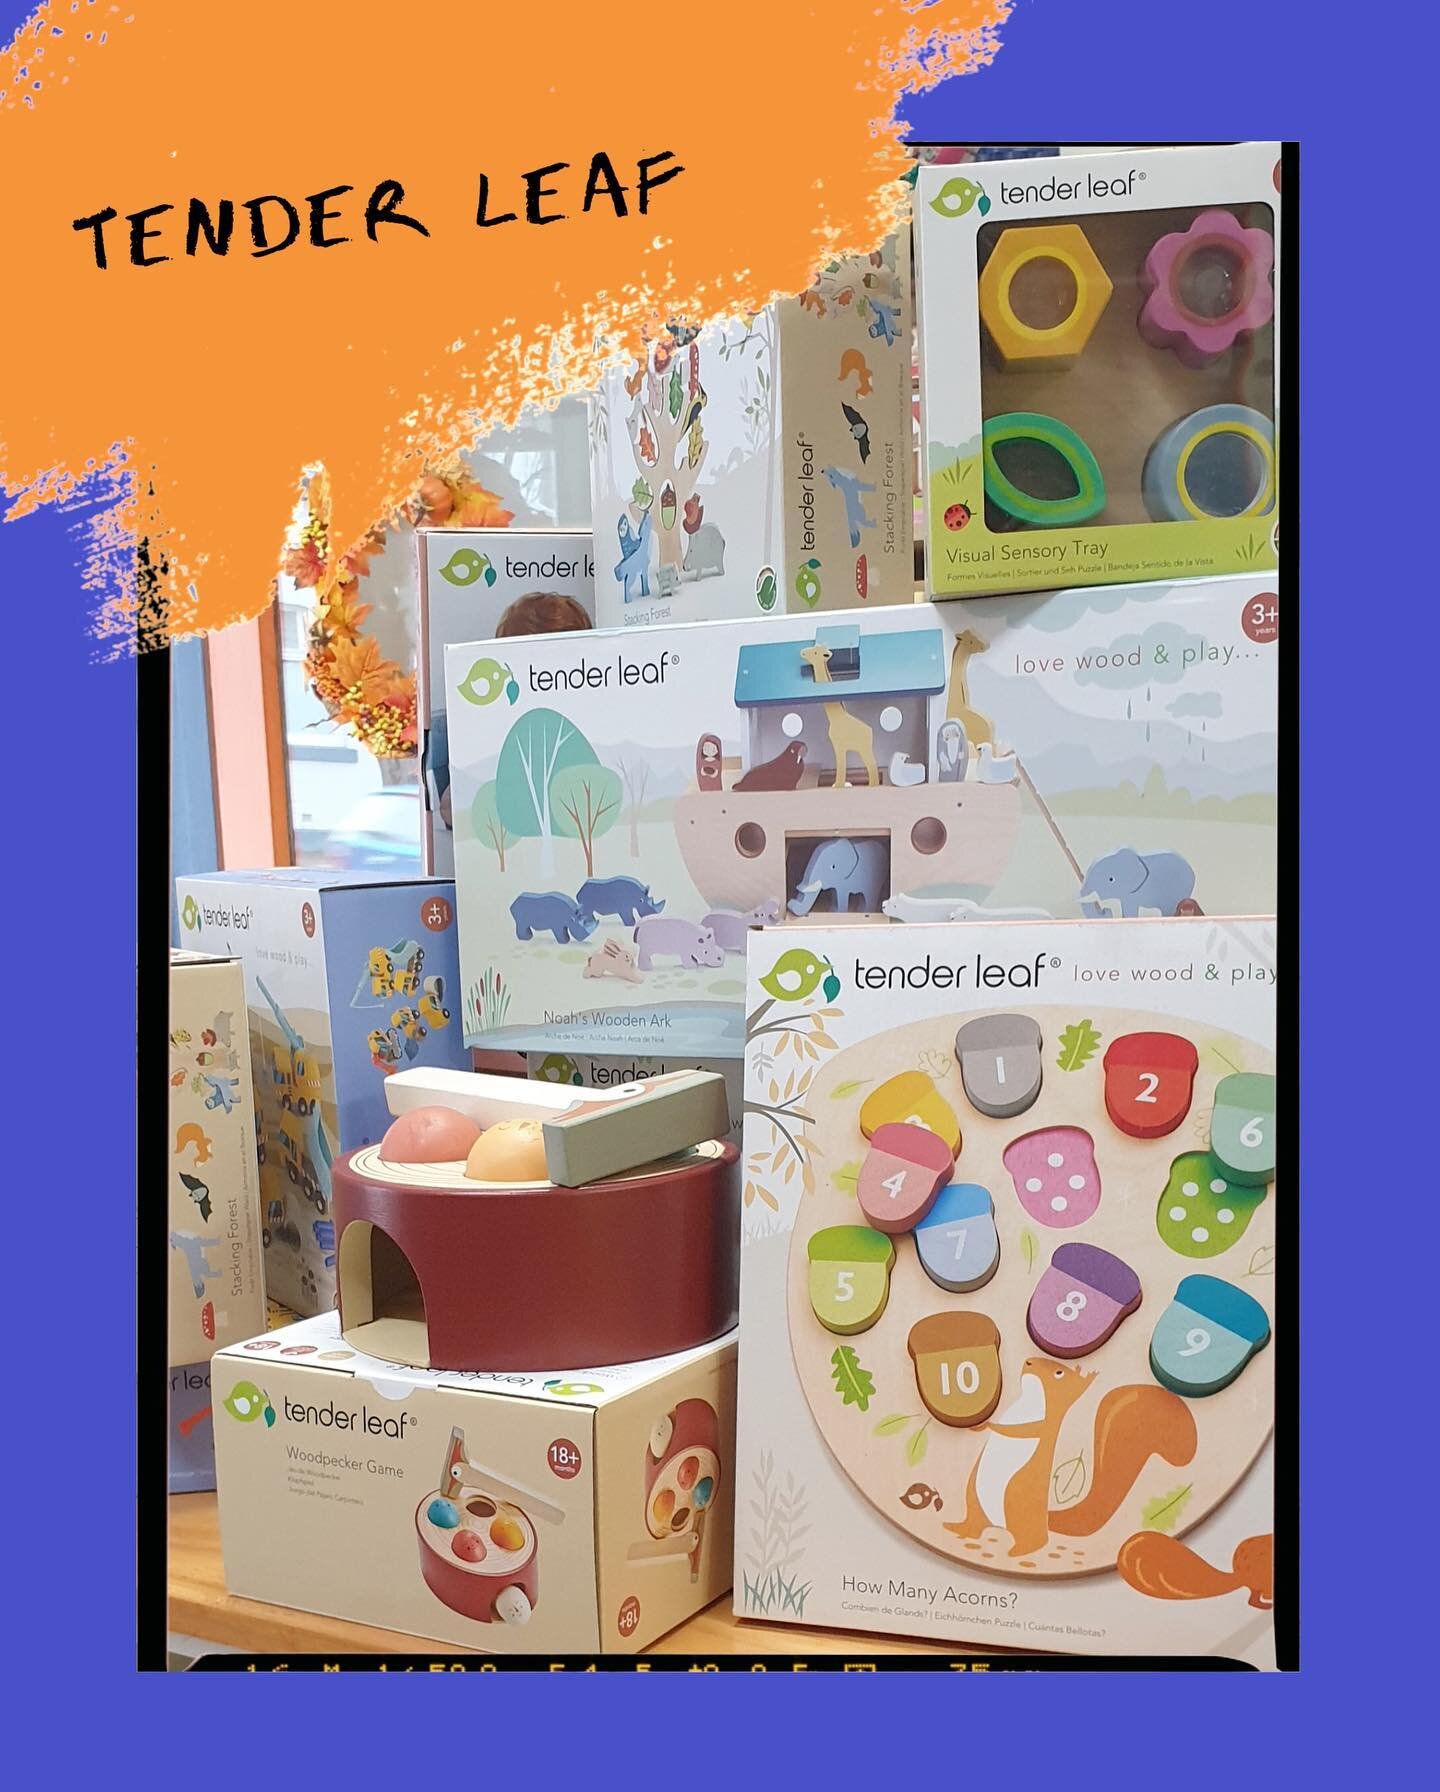 New in store!!! This new wooden range is sure to delight any child&rsquo;s imagination and creativity. Tender Leaf toys are designed with love and crafted from sustainable rubberwood.  #puddletown #bridgetownwa #shoplocal #woodentoys